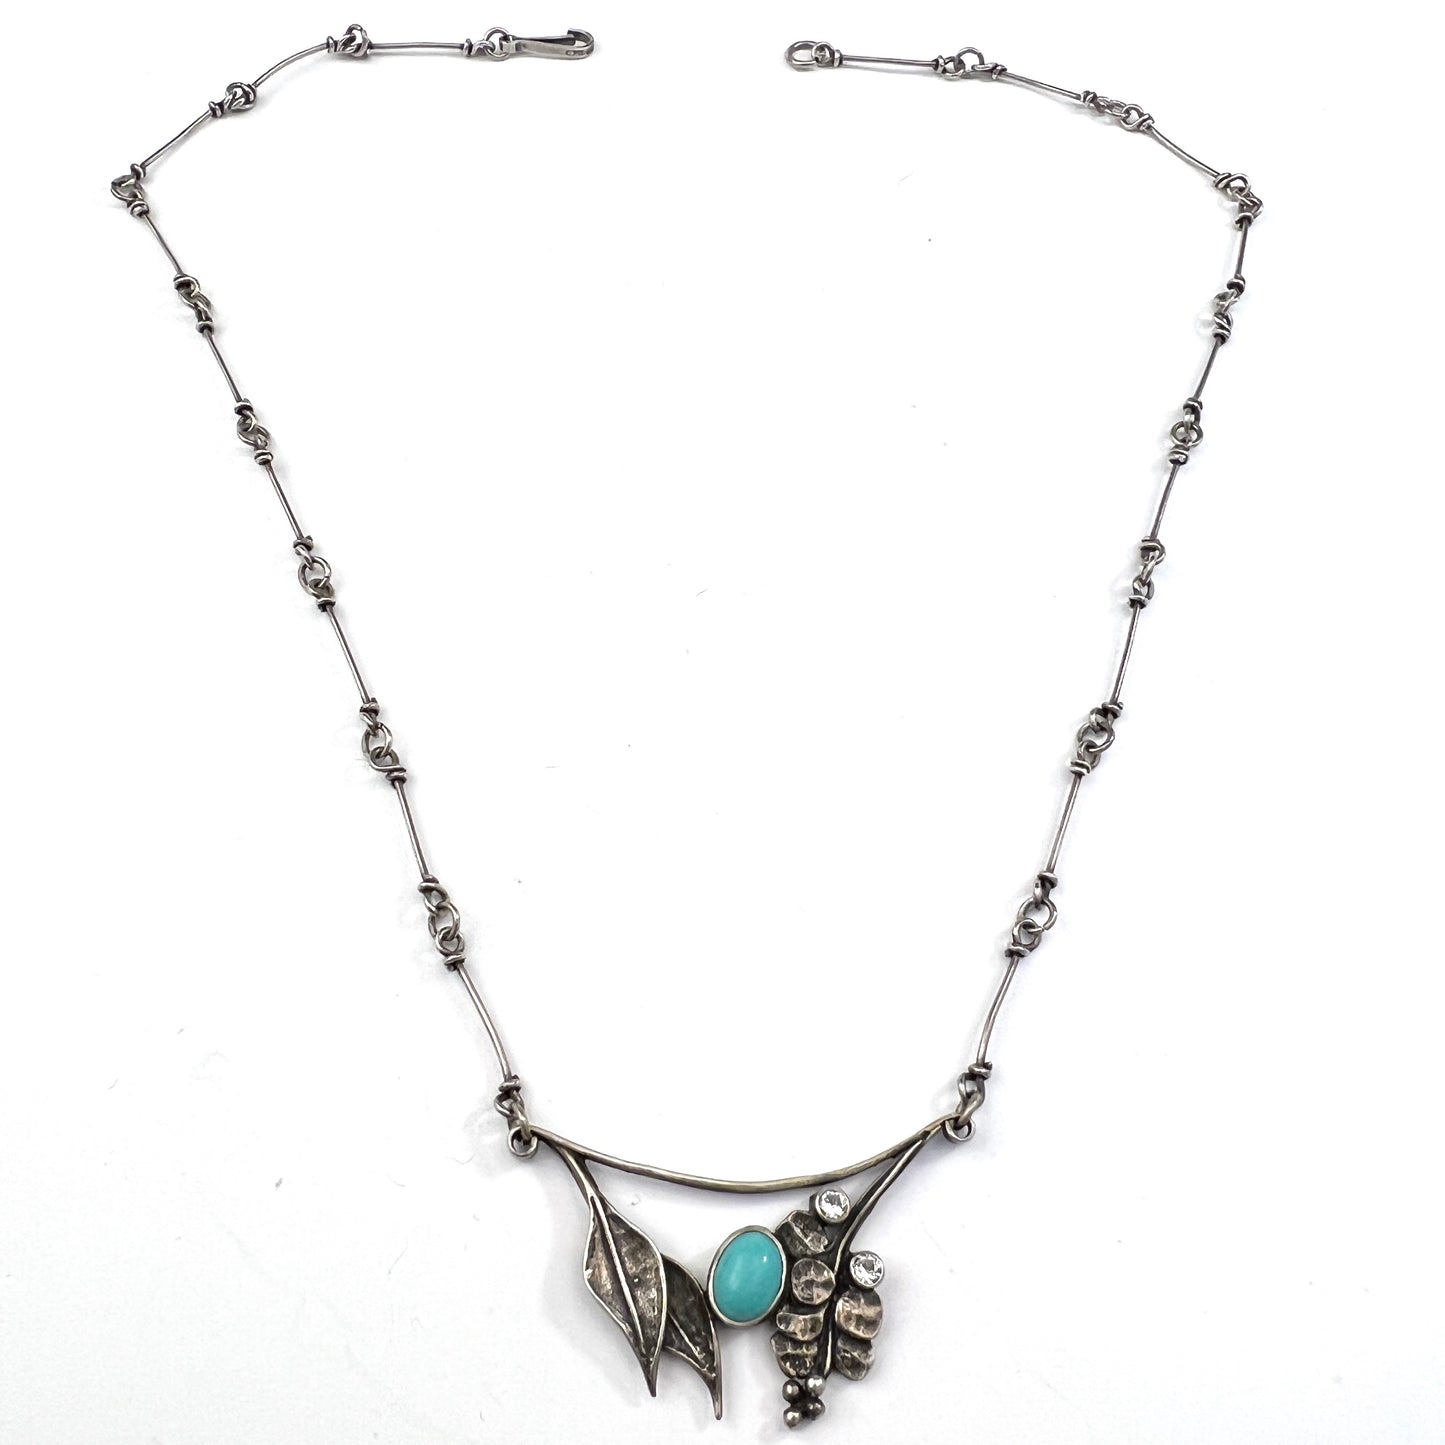 Vintage Sterling Silver Turquoise Paste Necklace.